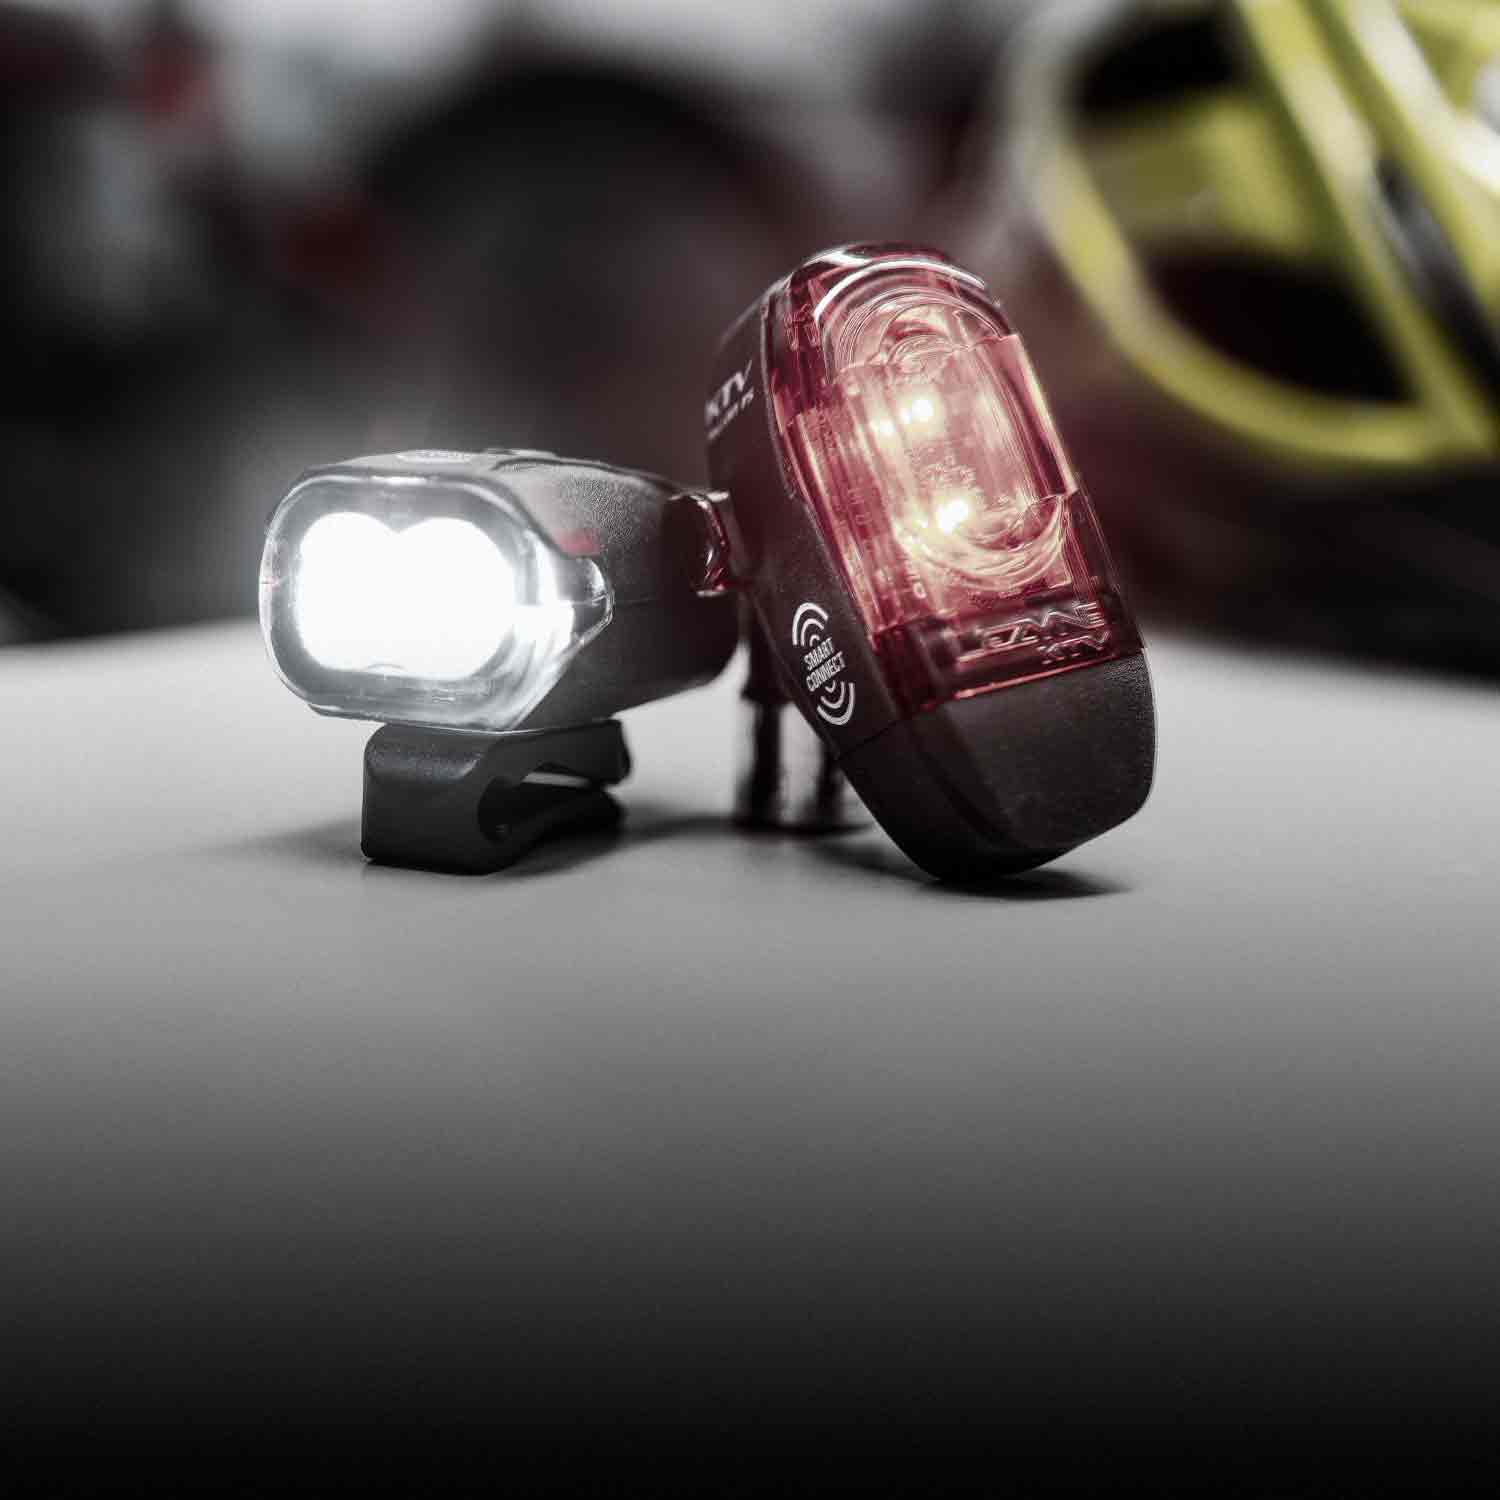 A front and a rear bicycle light on a surface. One of the lights has KTV Smart Connect printed on the side.